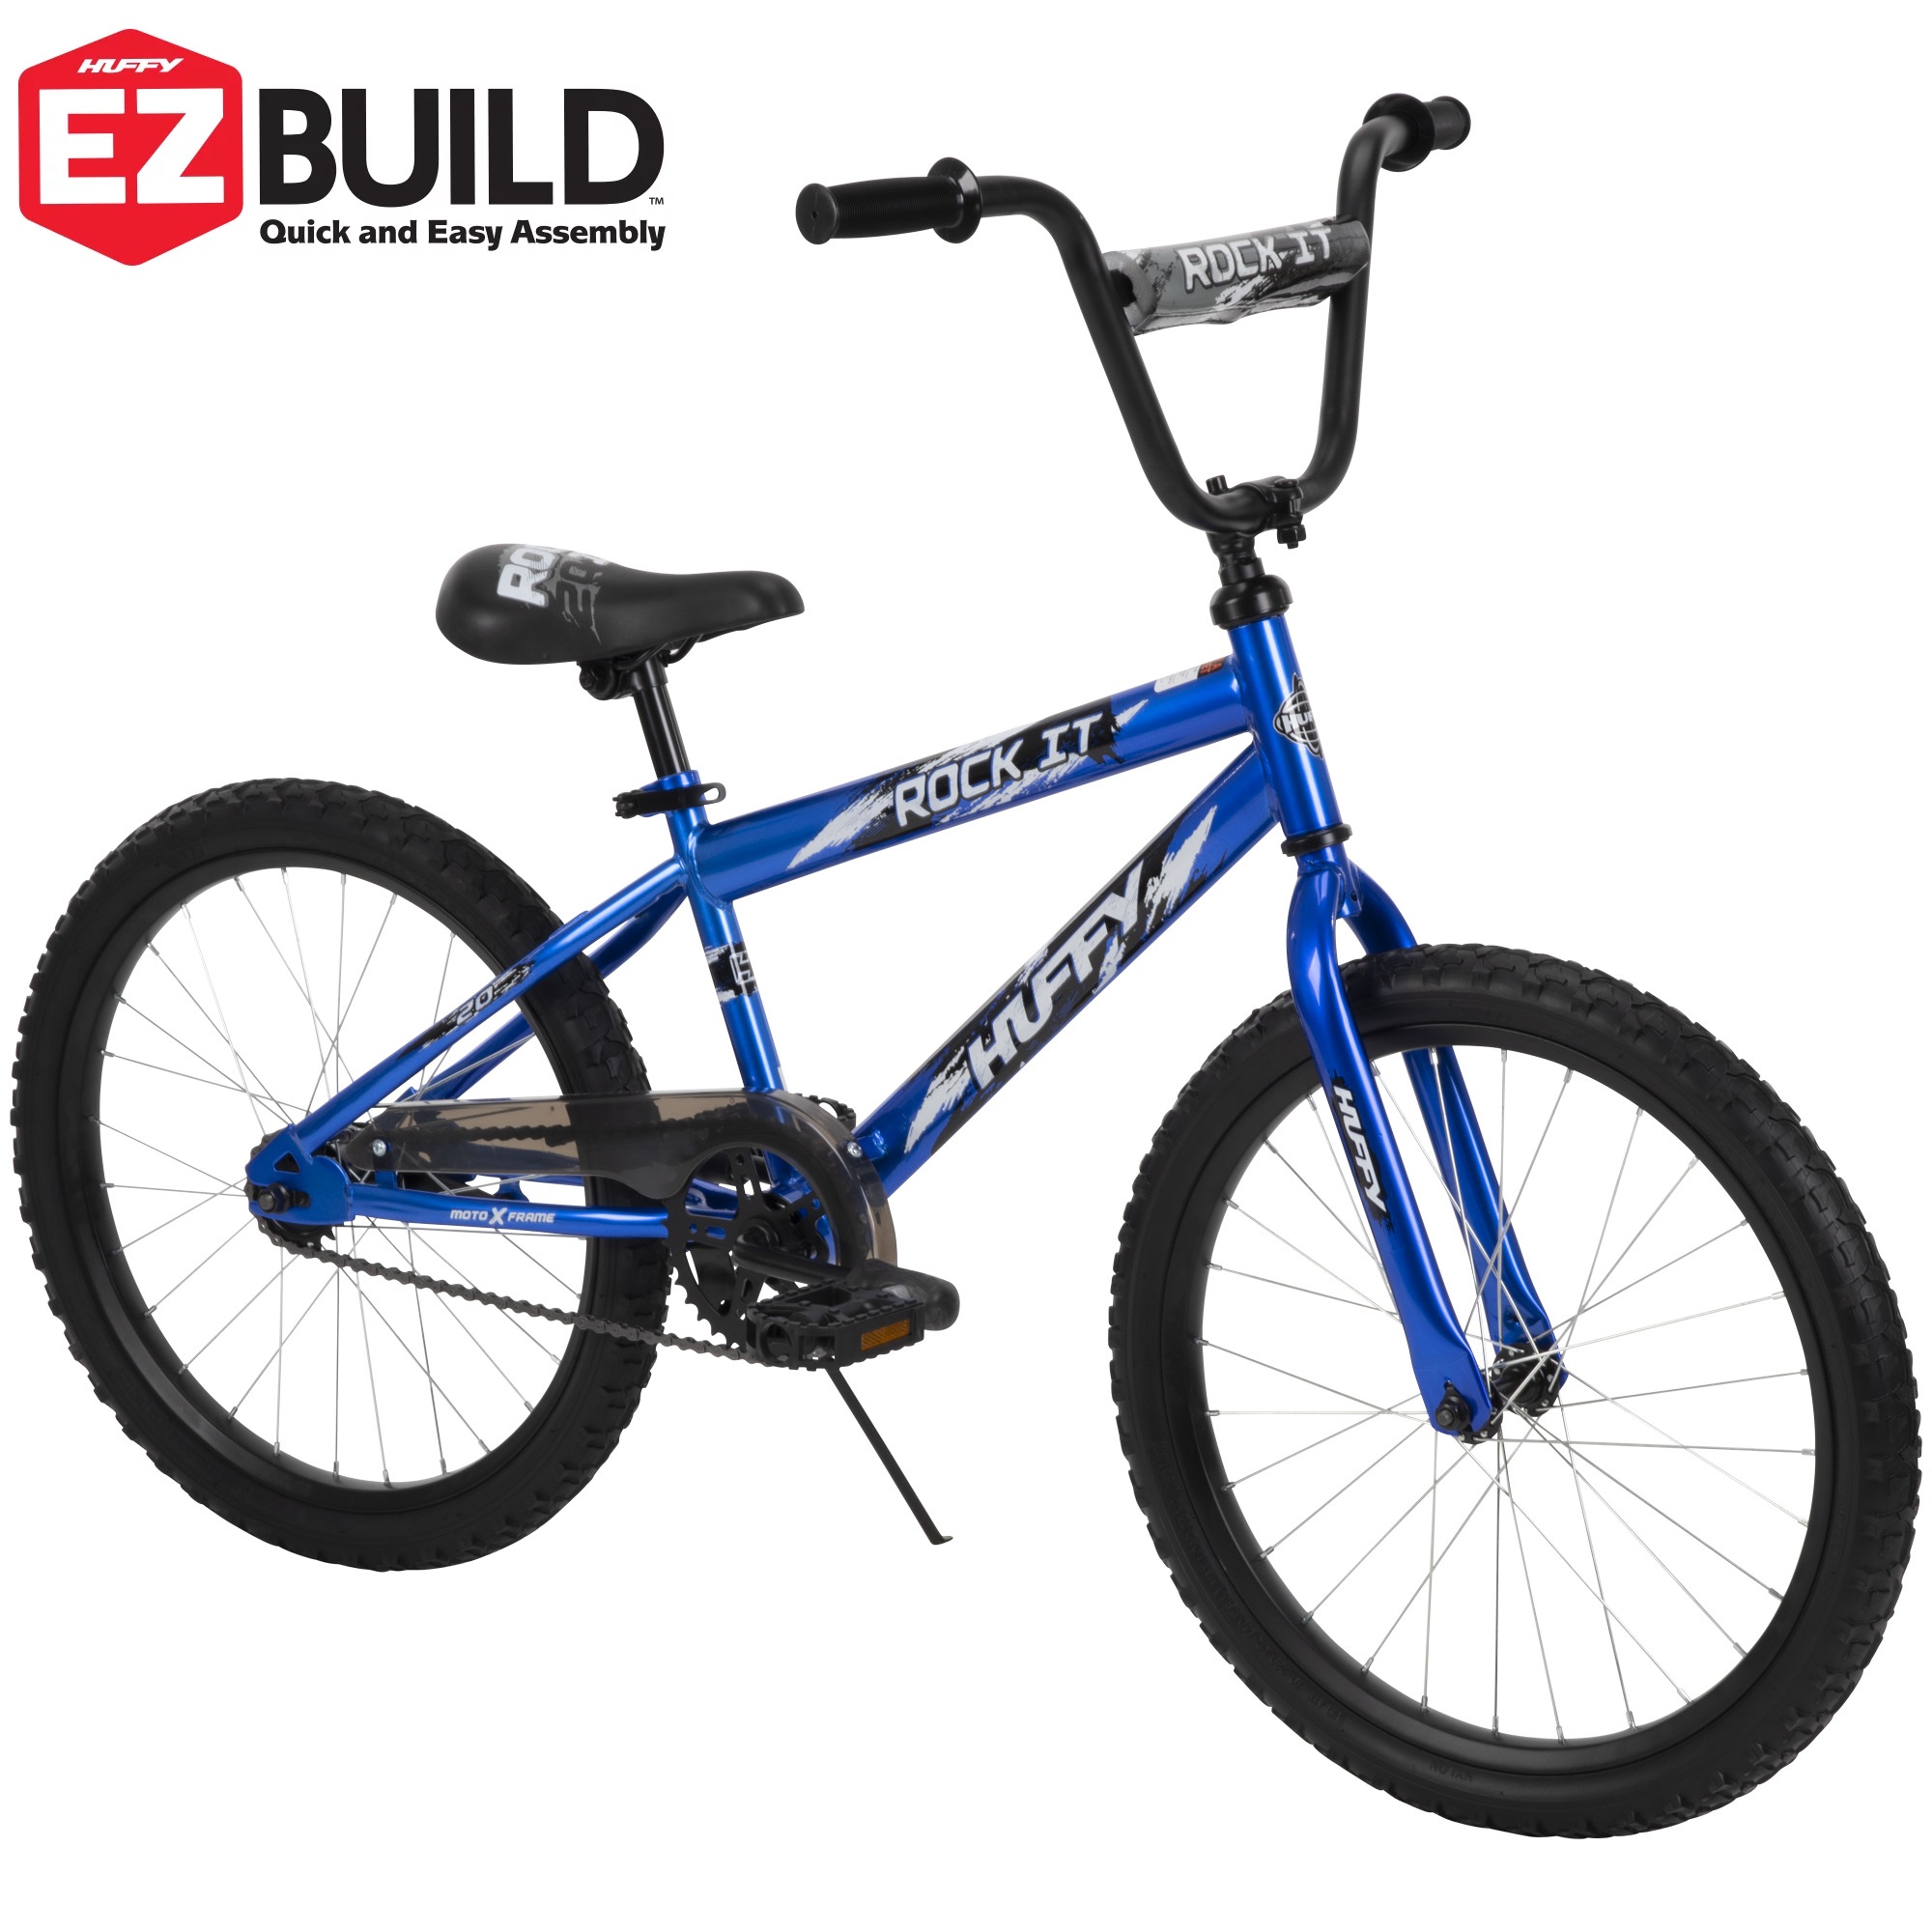 Huffy 20 in. Rock It Kids Bike for Boys Ages 5 and up, Child, Royal Blue - image 5 of 11